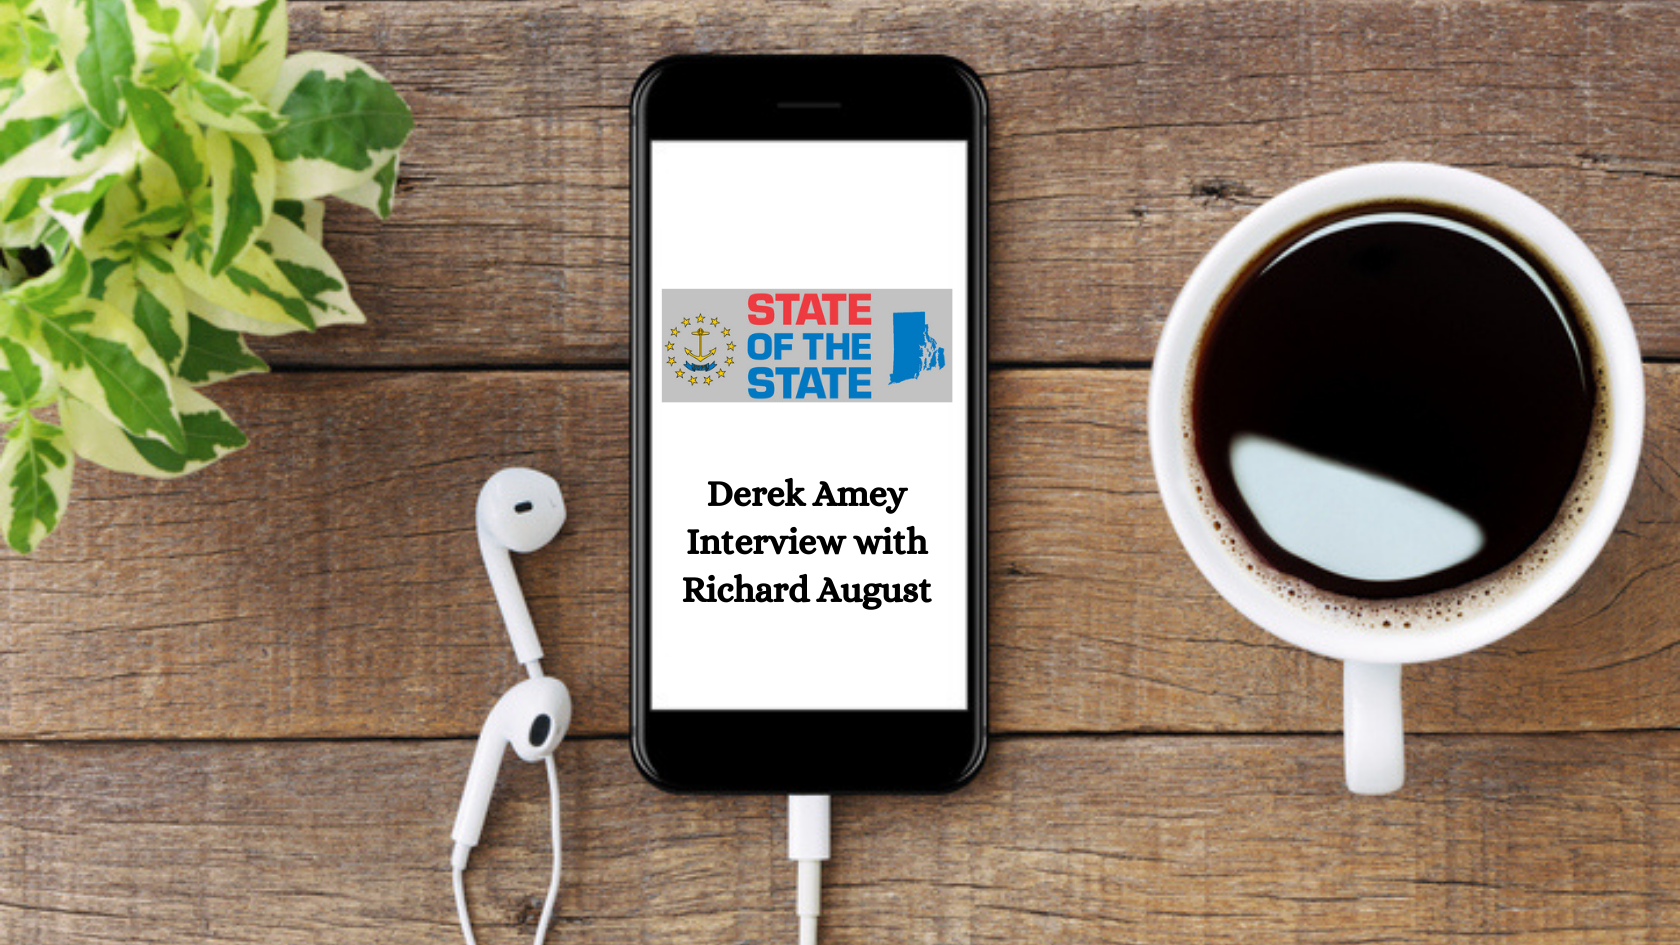 Derek Amey on “State of the State” with Richard August: “Where Have All The Workers Gone?”